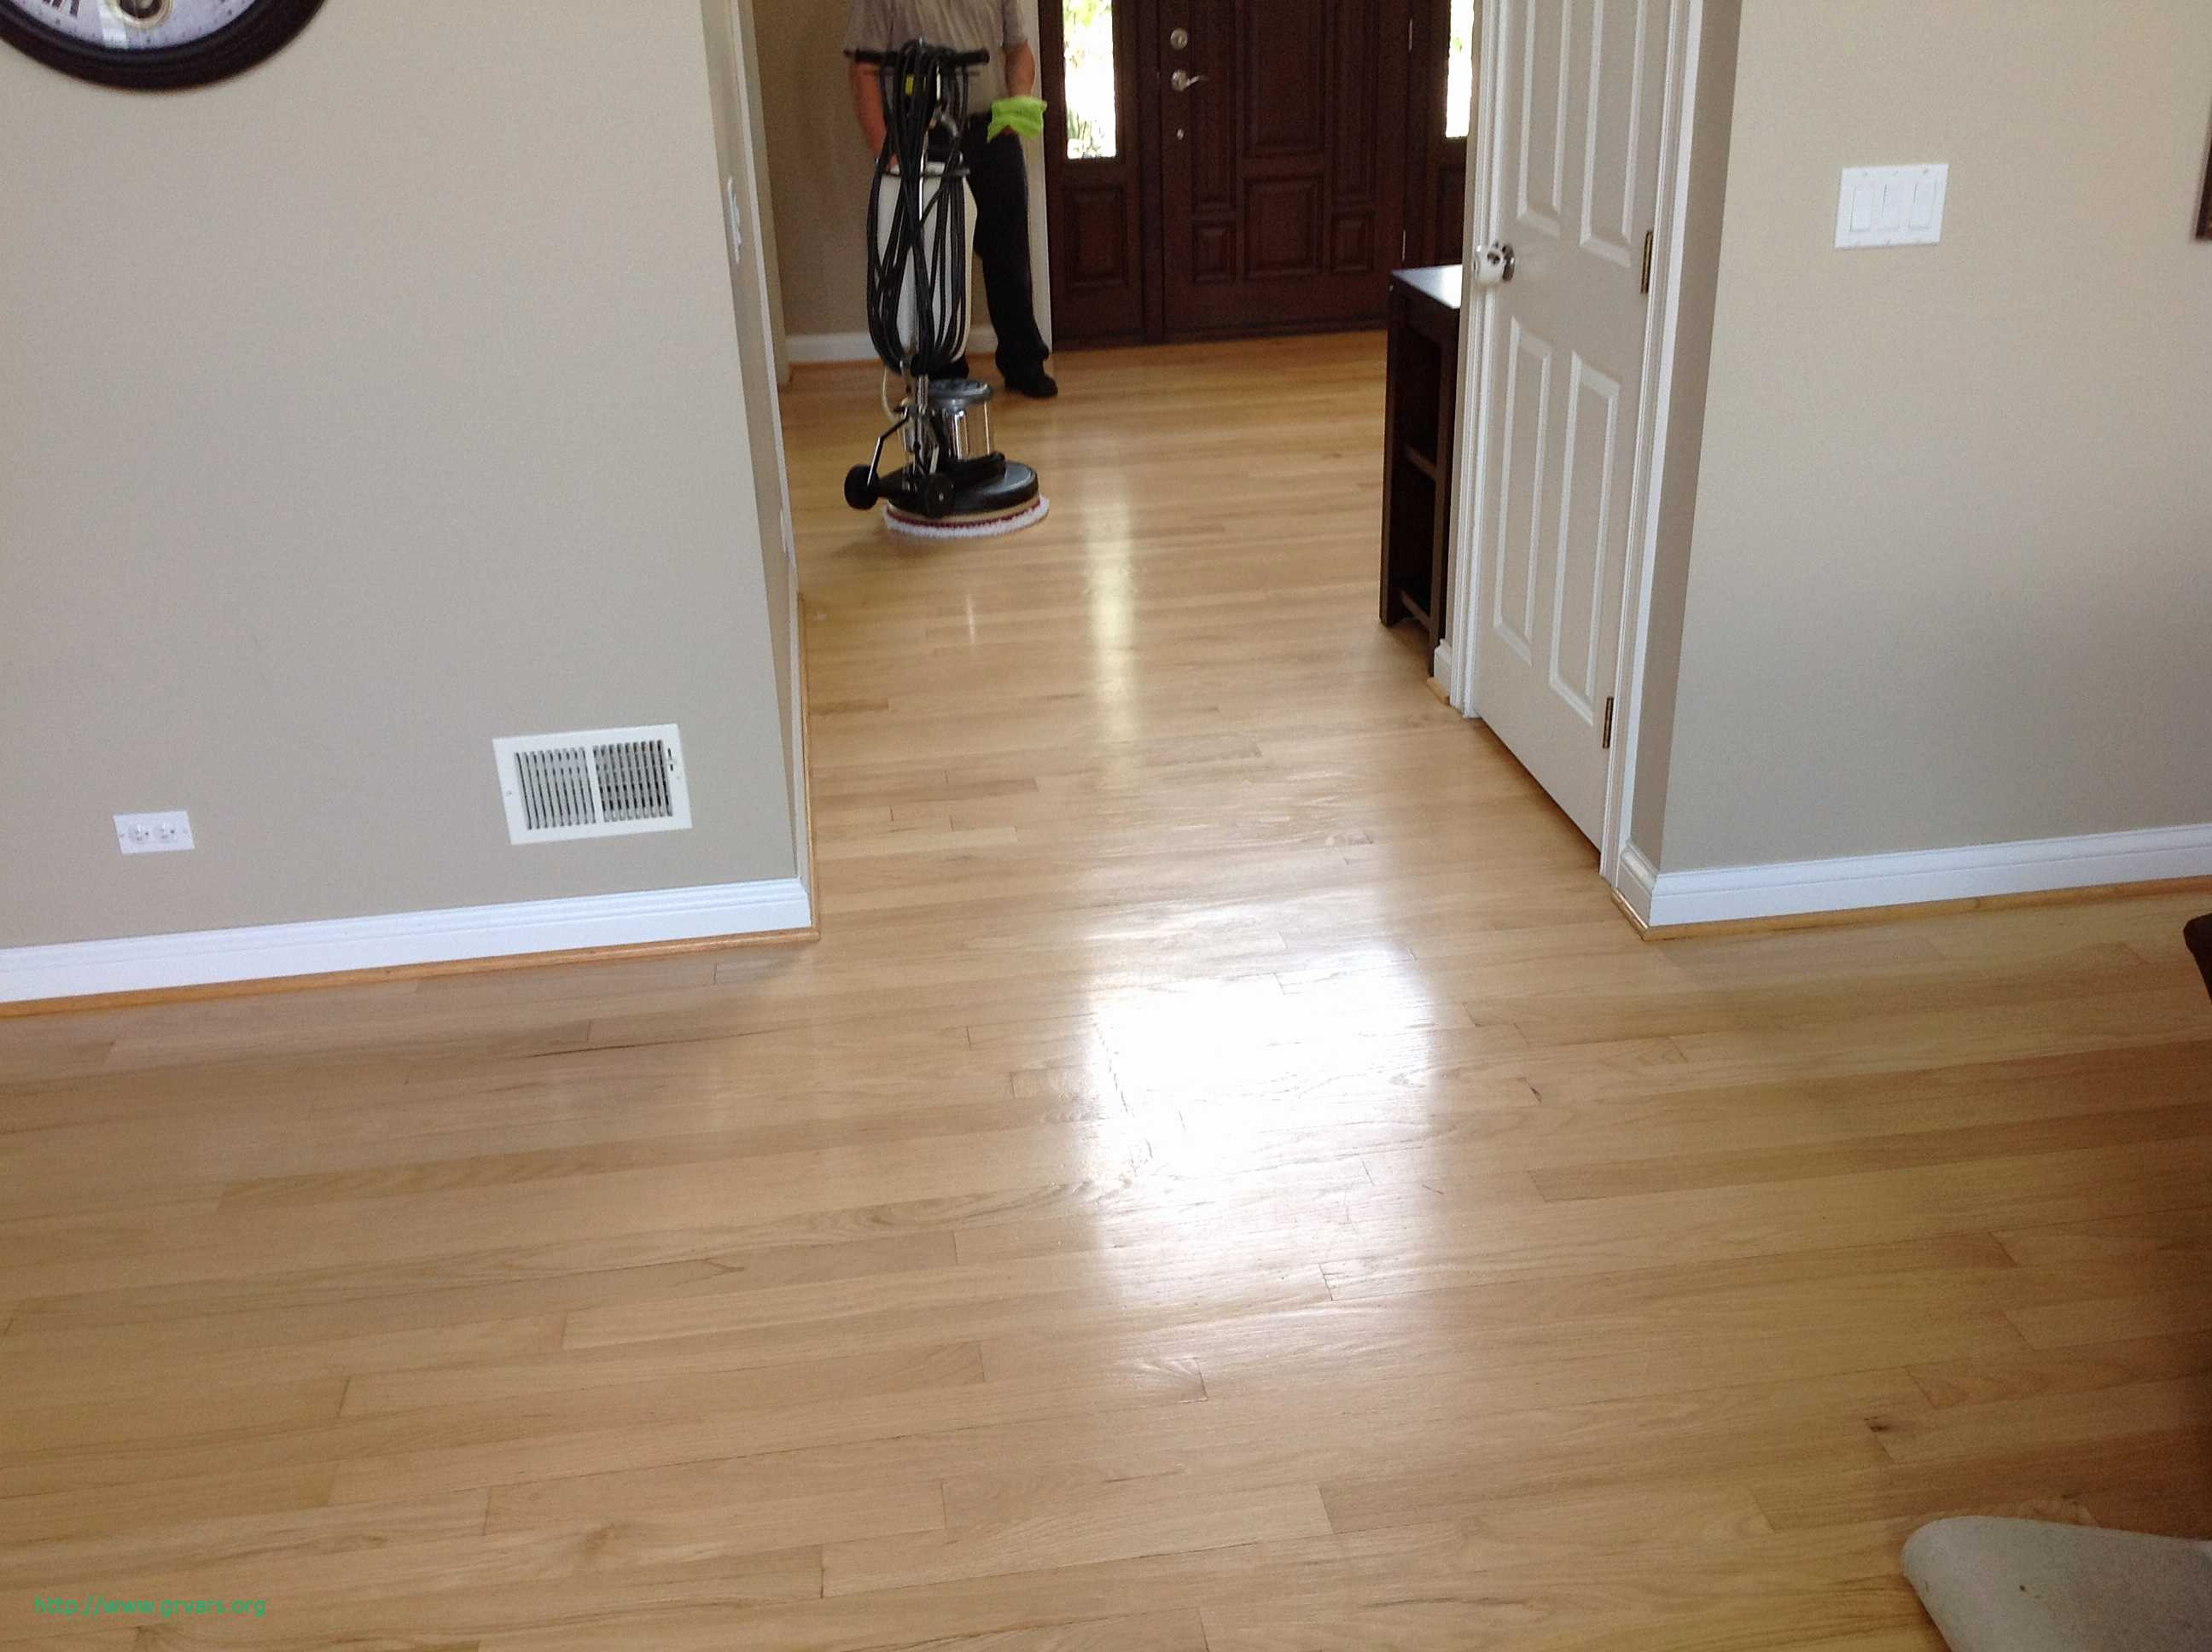 30 Stylish Hardwood Floor Cleaning Raleigh 2024 free download hardwood floor cleaning raleigh of 18 charmant what is best for cleaning wood floors ideas blog inside floor floorod cleaning hardwood carpet lake forest il rare image luxury best wood floor